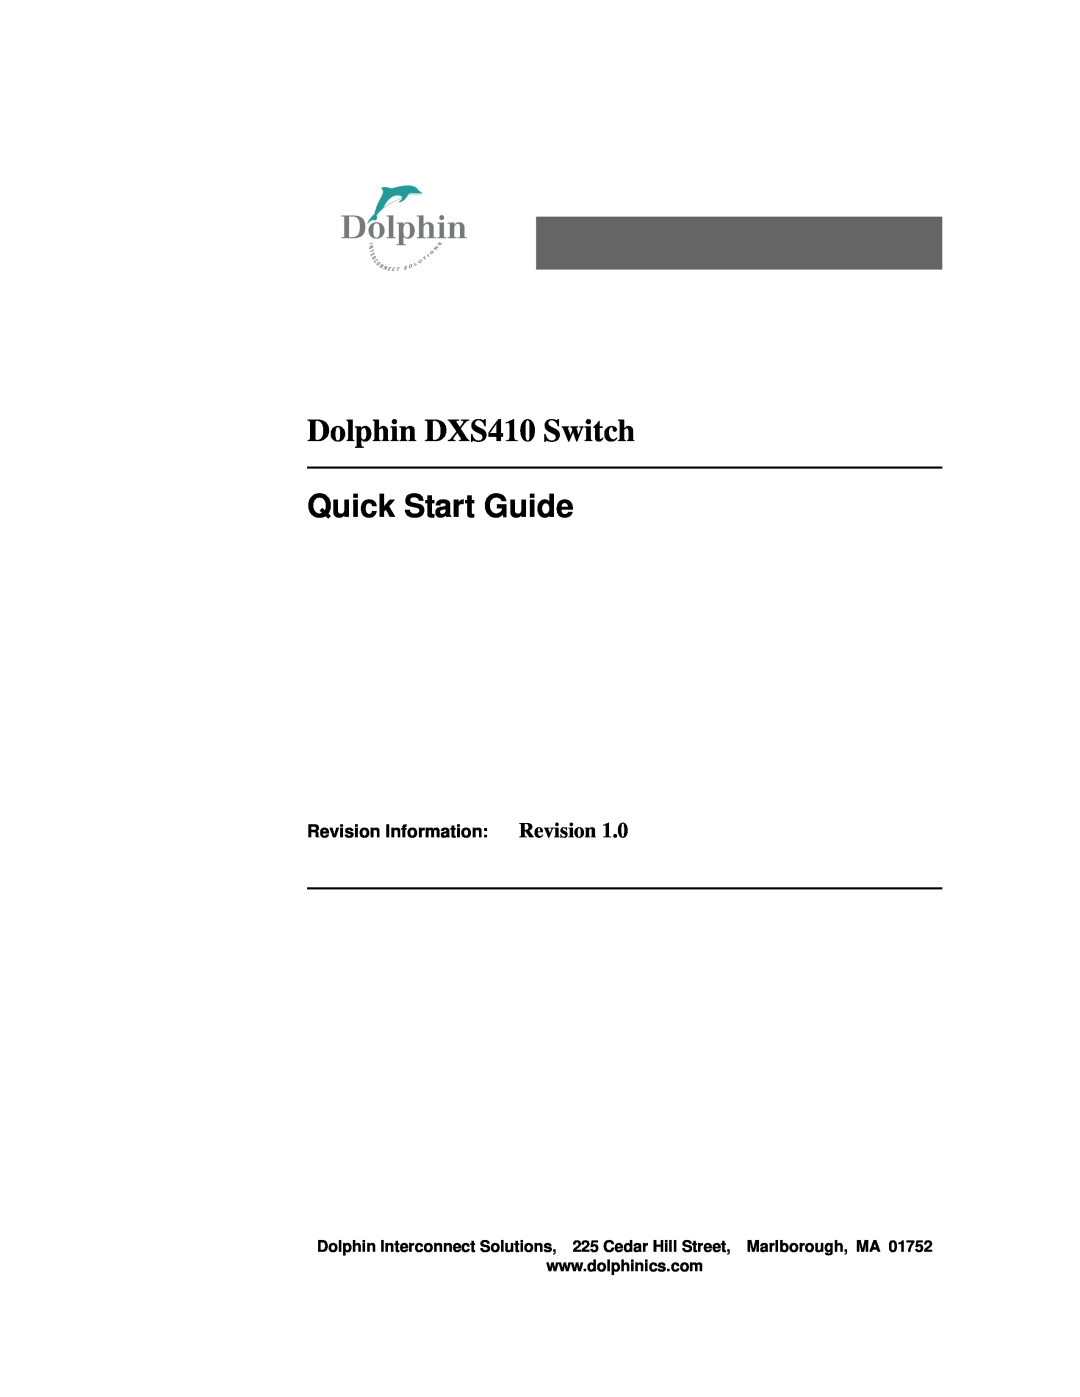 Dolphin Peripherals quick start Dolphin DXS410 Switch, Quick Start Guide, Revision Information Revision 